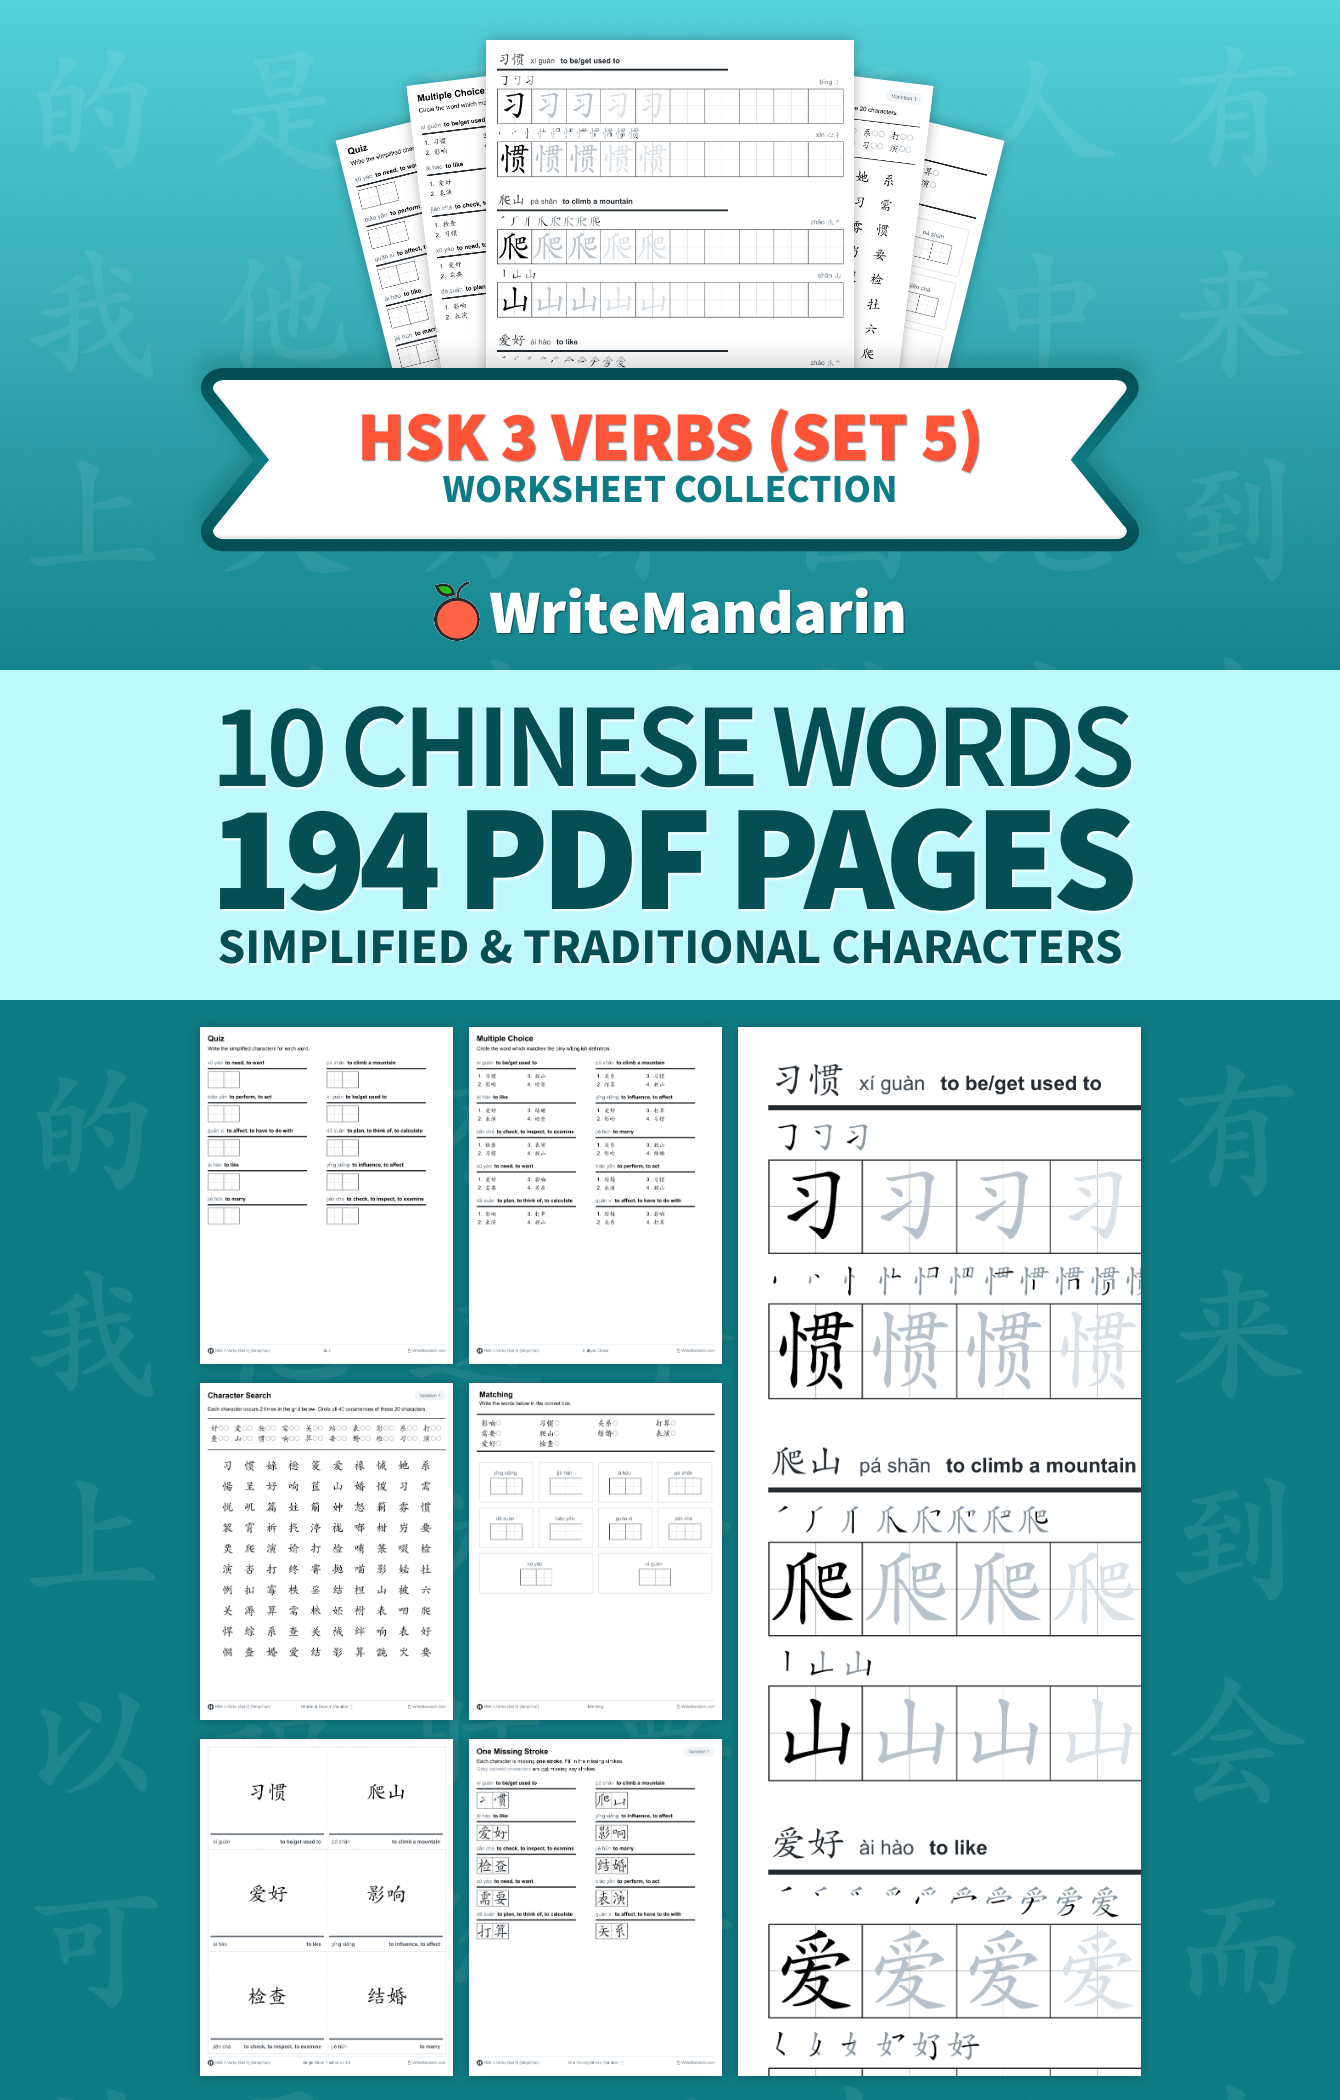 Preview image of HSK 3 Verbs (Set 5) worksheet collection